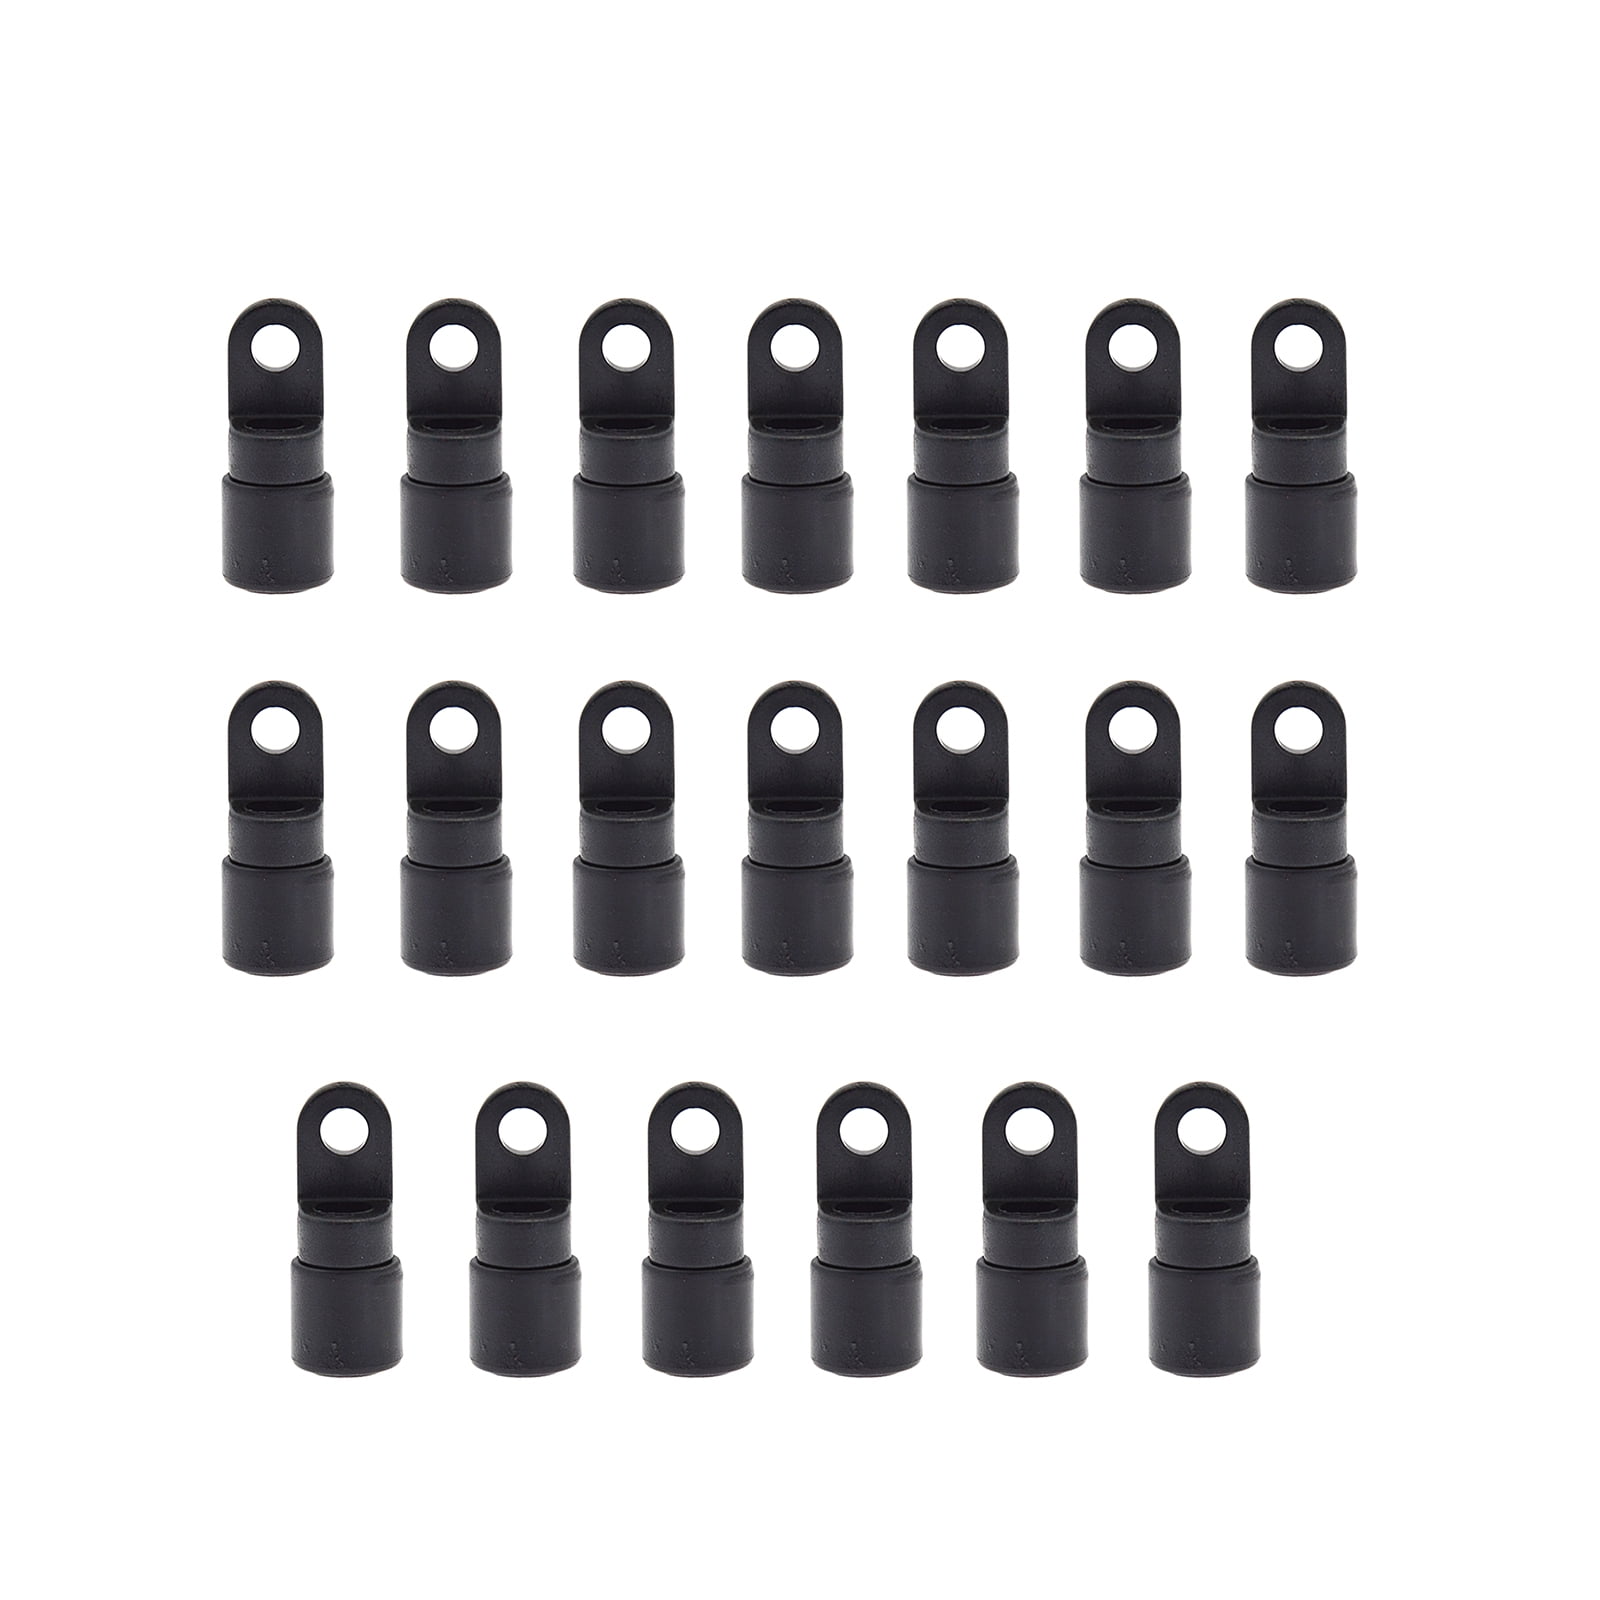 20Pcs 6mm Plastic Snap Hook Buckle Cord End Lock for Elastic Rope Fixed Clips